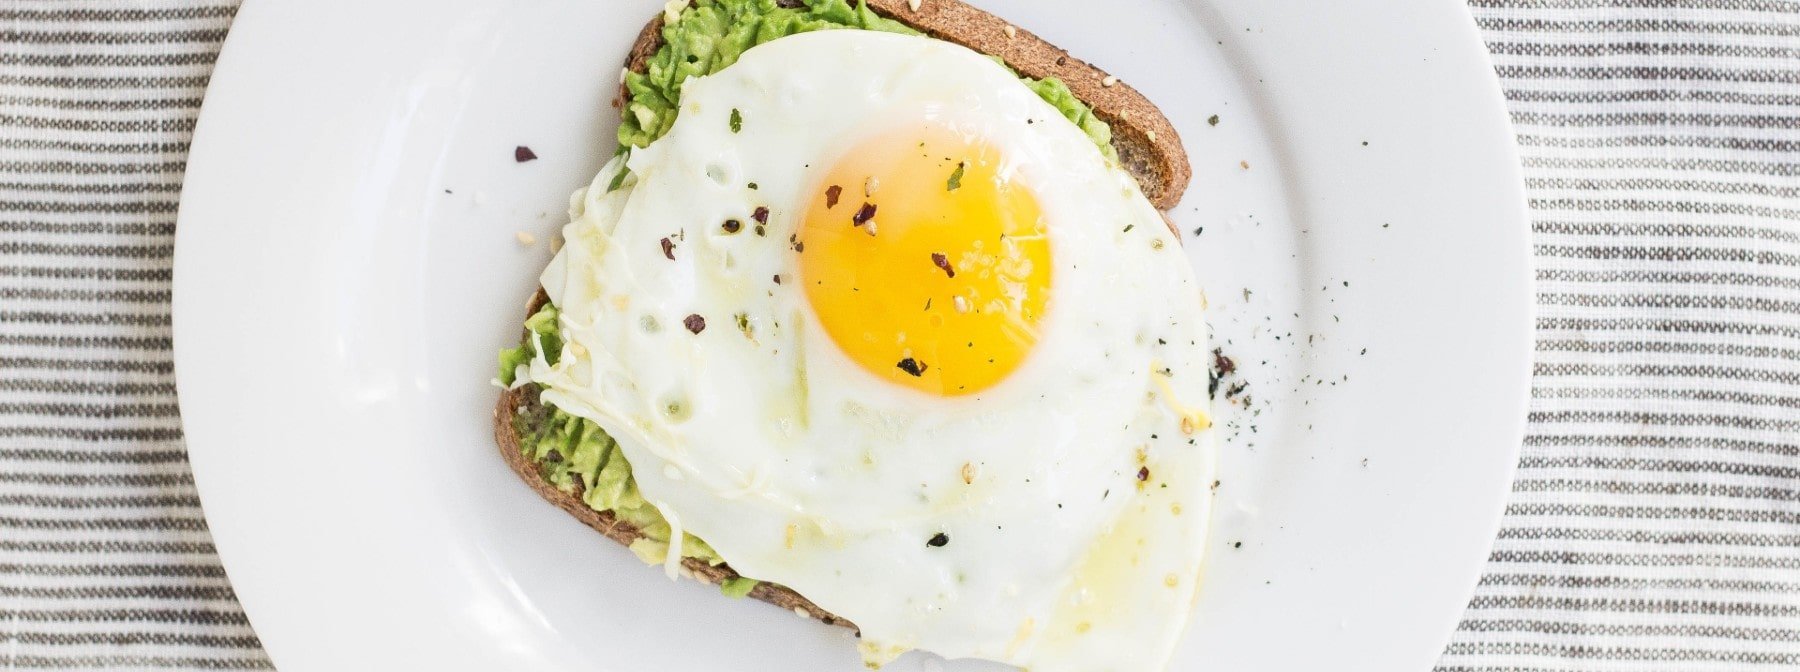 5 Easy Ways To Get More Protein Into Your Diet